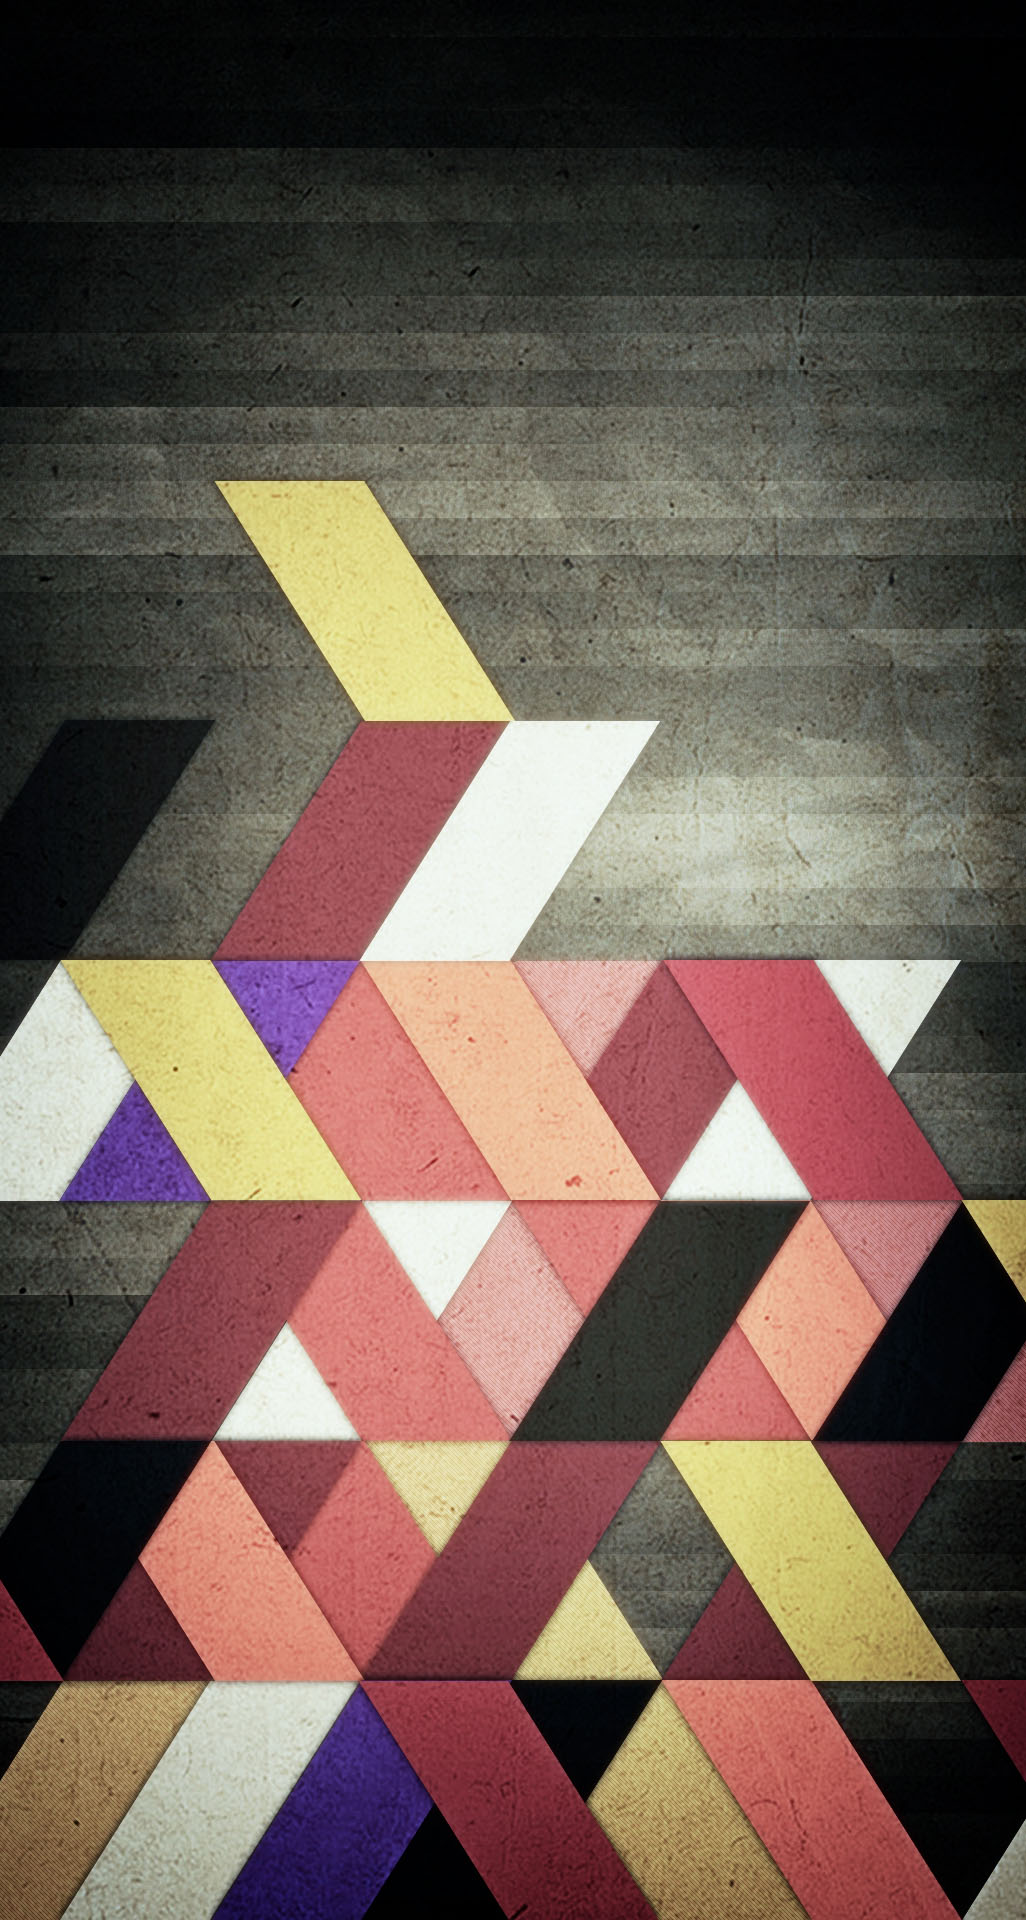 geometric shapes wallpaper,triangle,pattern,floor,line,graphic design